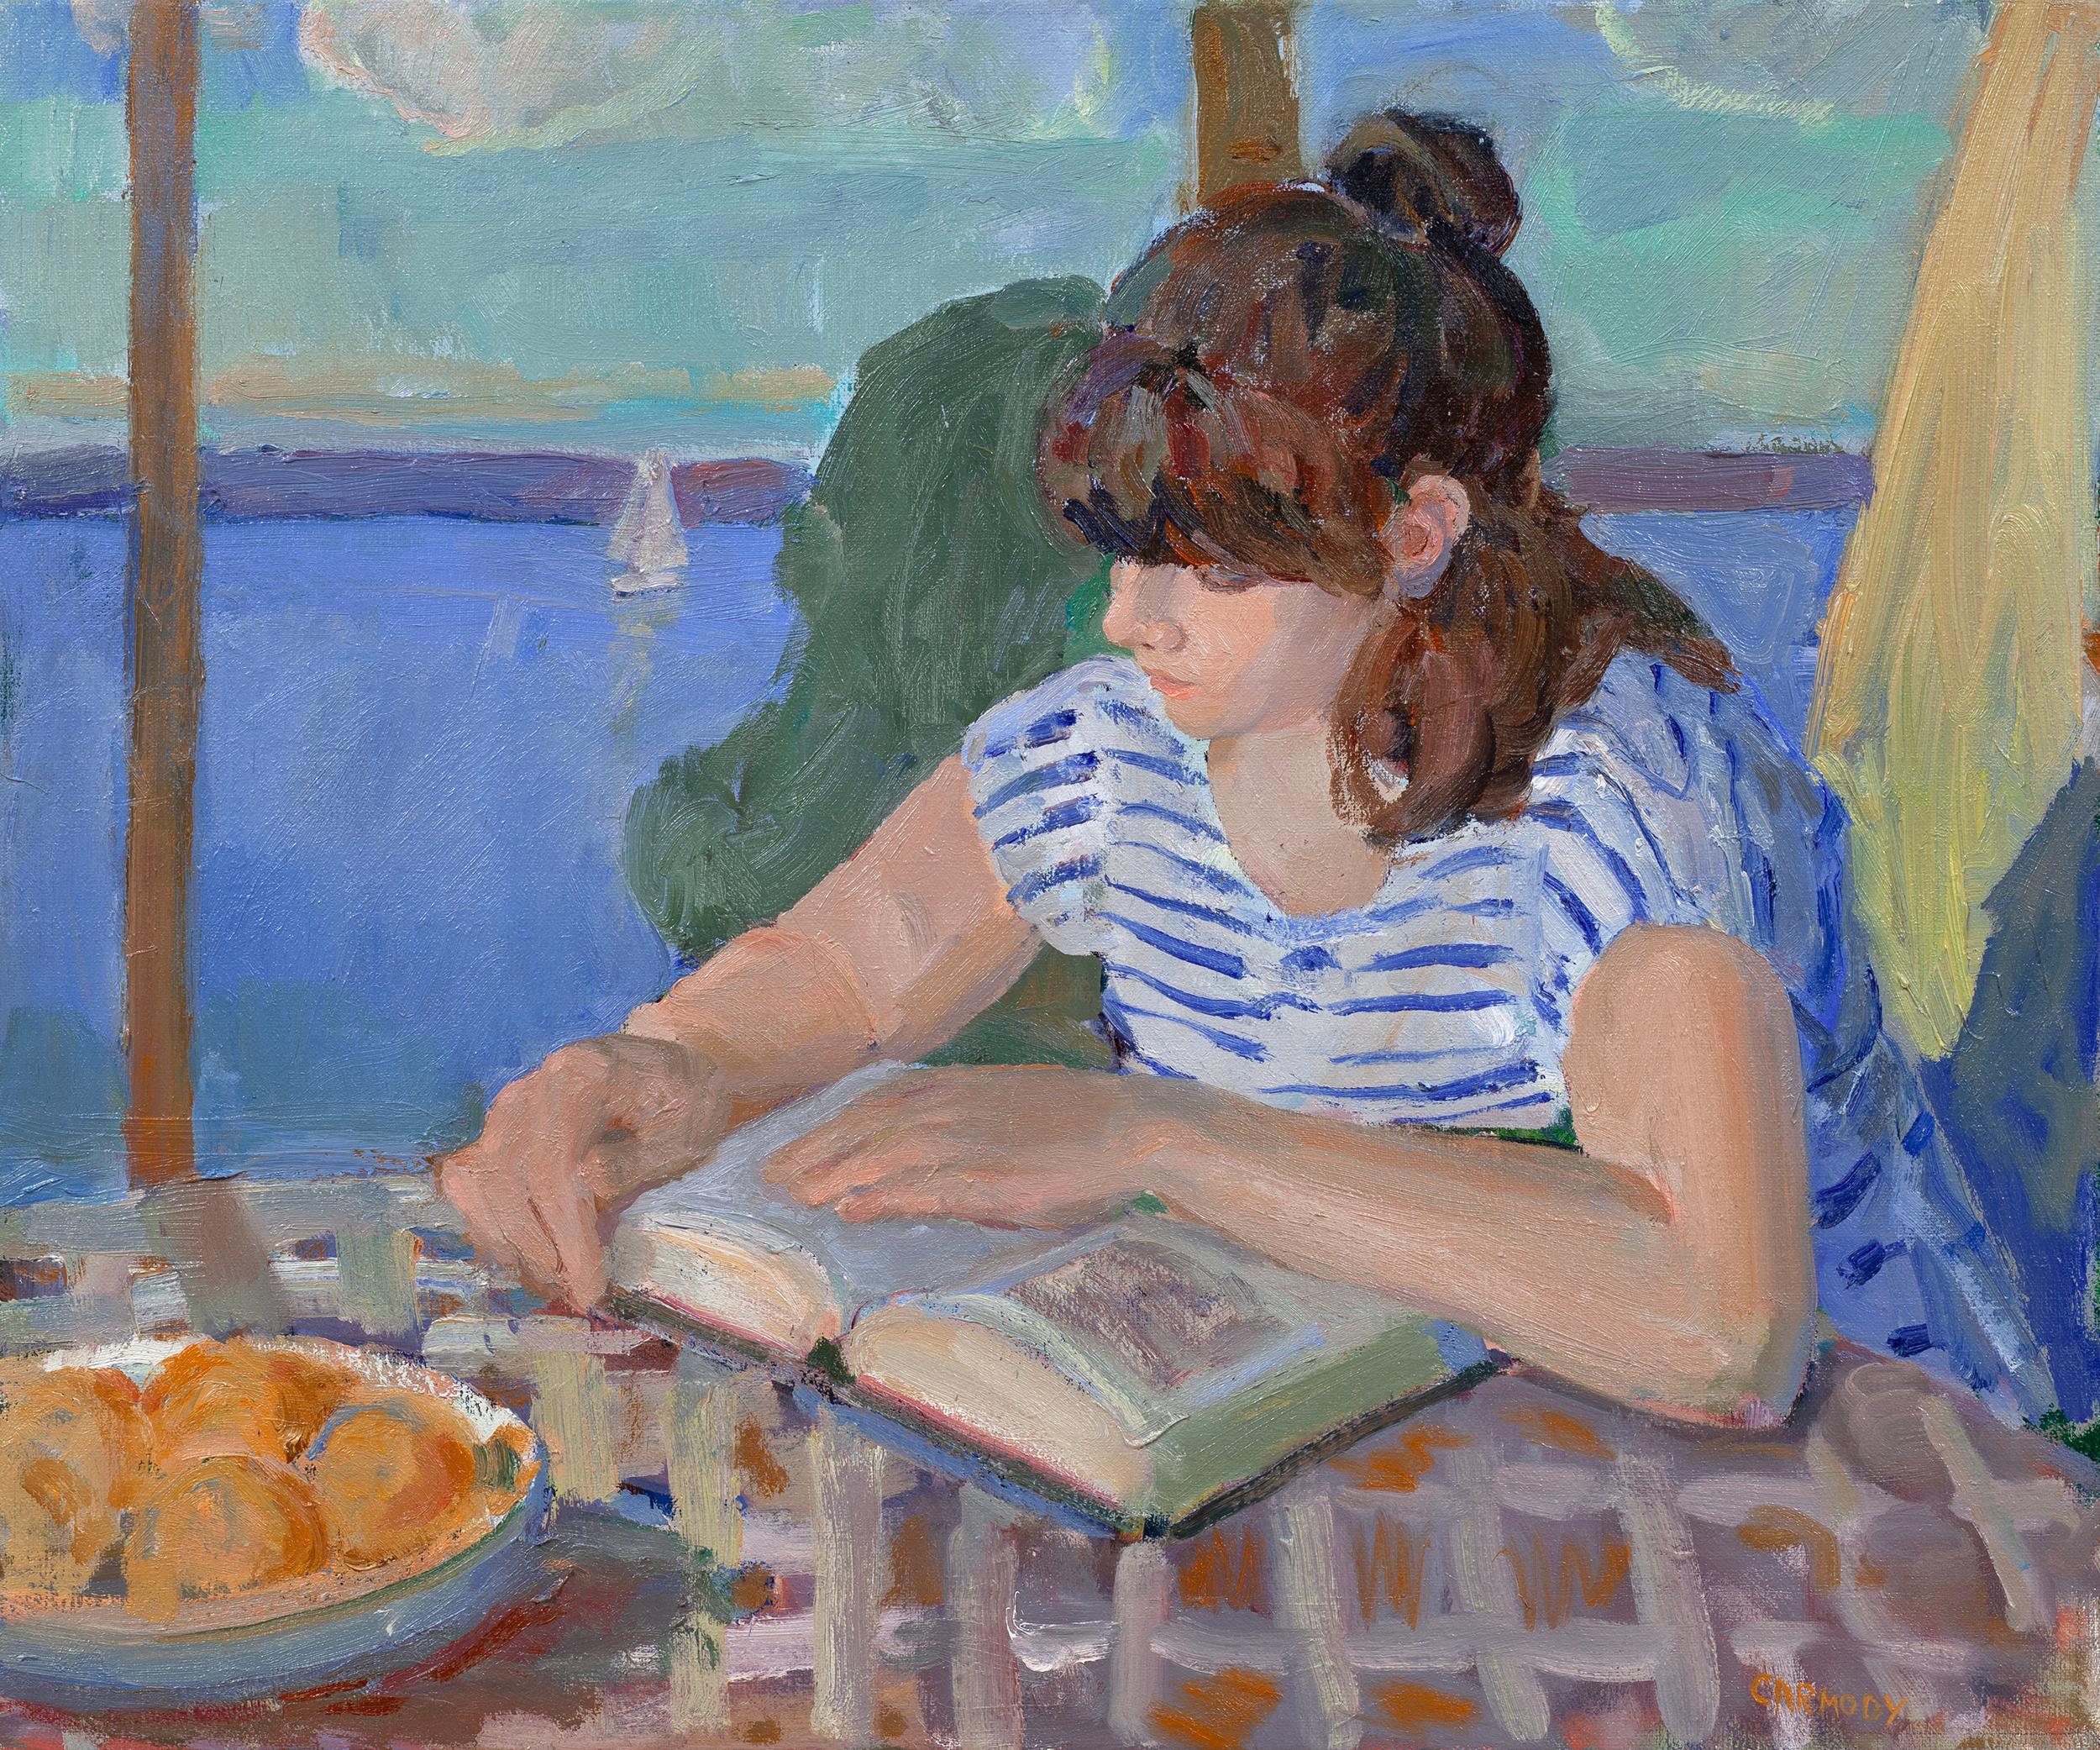 "Summer Read" is a figurative American contemporary oil painting by Kelly Carmody of a girl reading a book.

Kelly Carmody’s work has been widely exhibited and collected. One of her major figurative works was chosen as a finalist for the 2016 Outwin